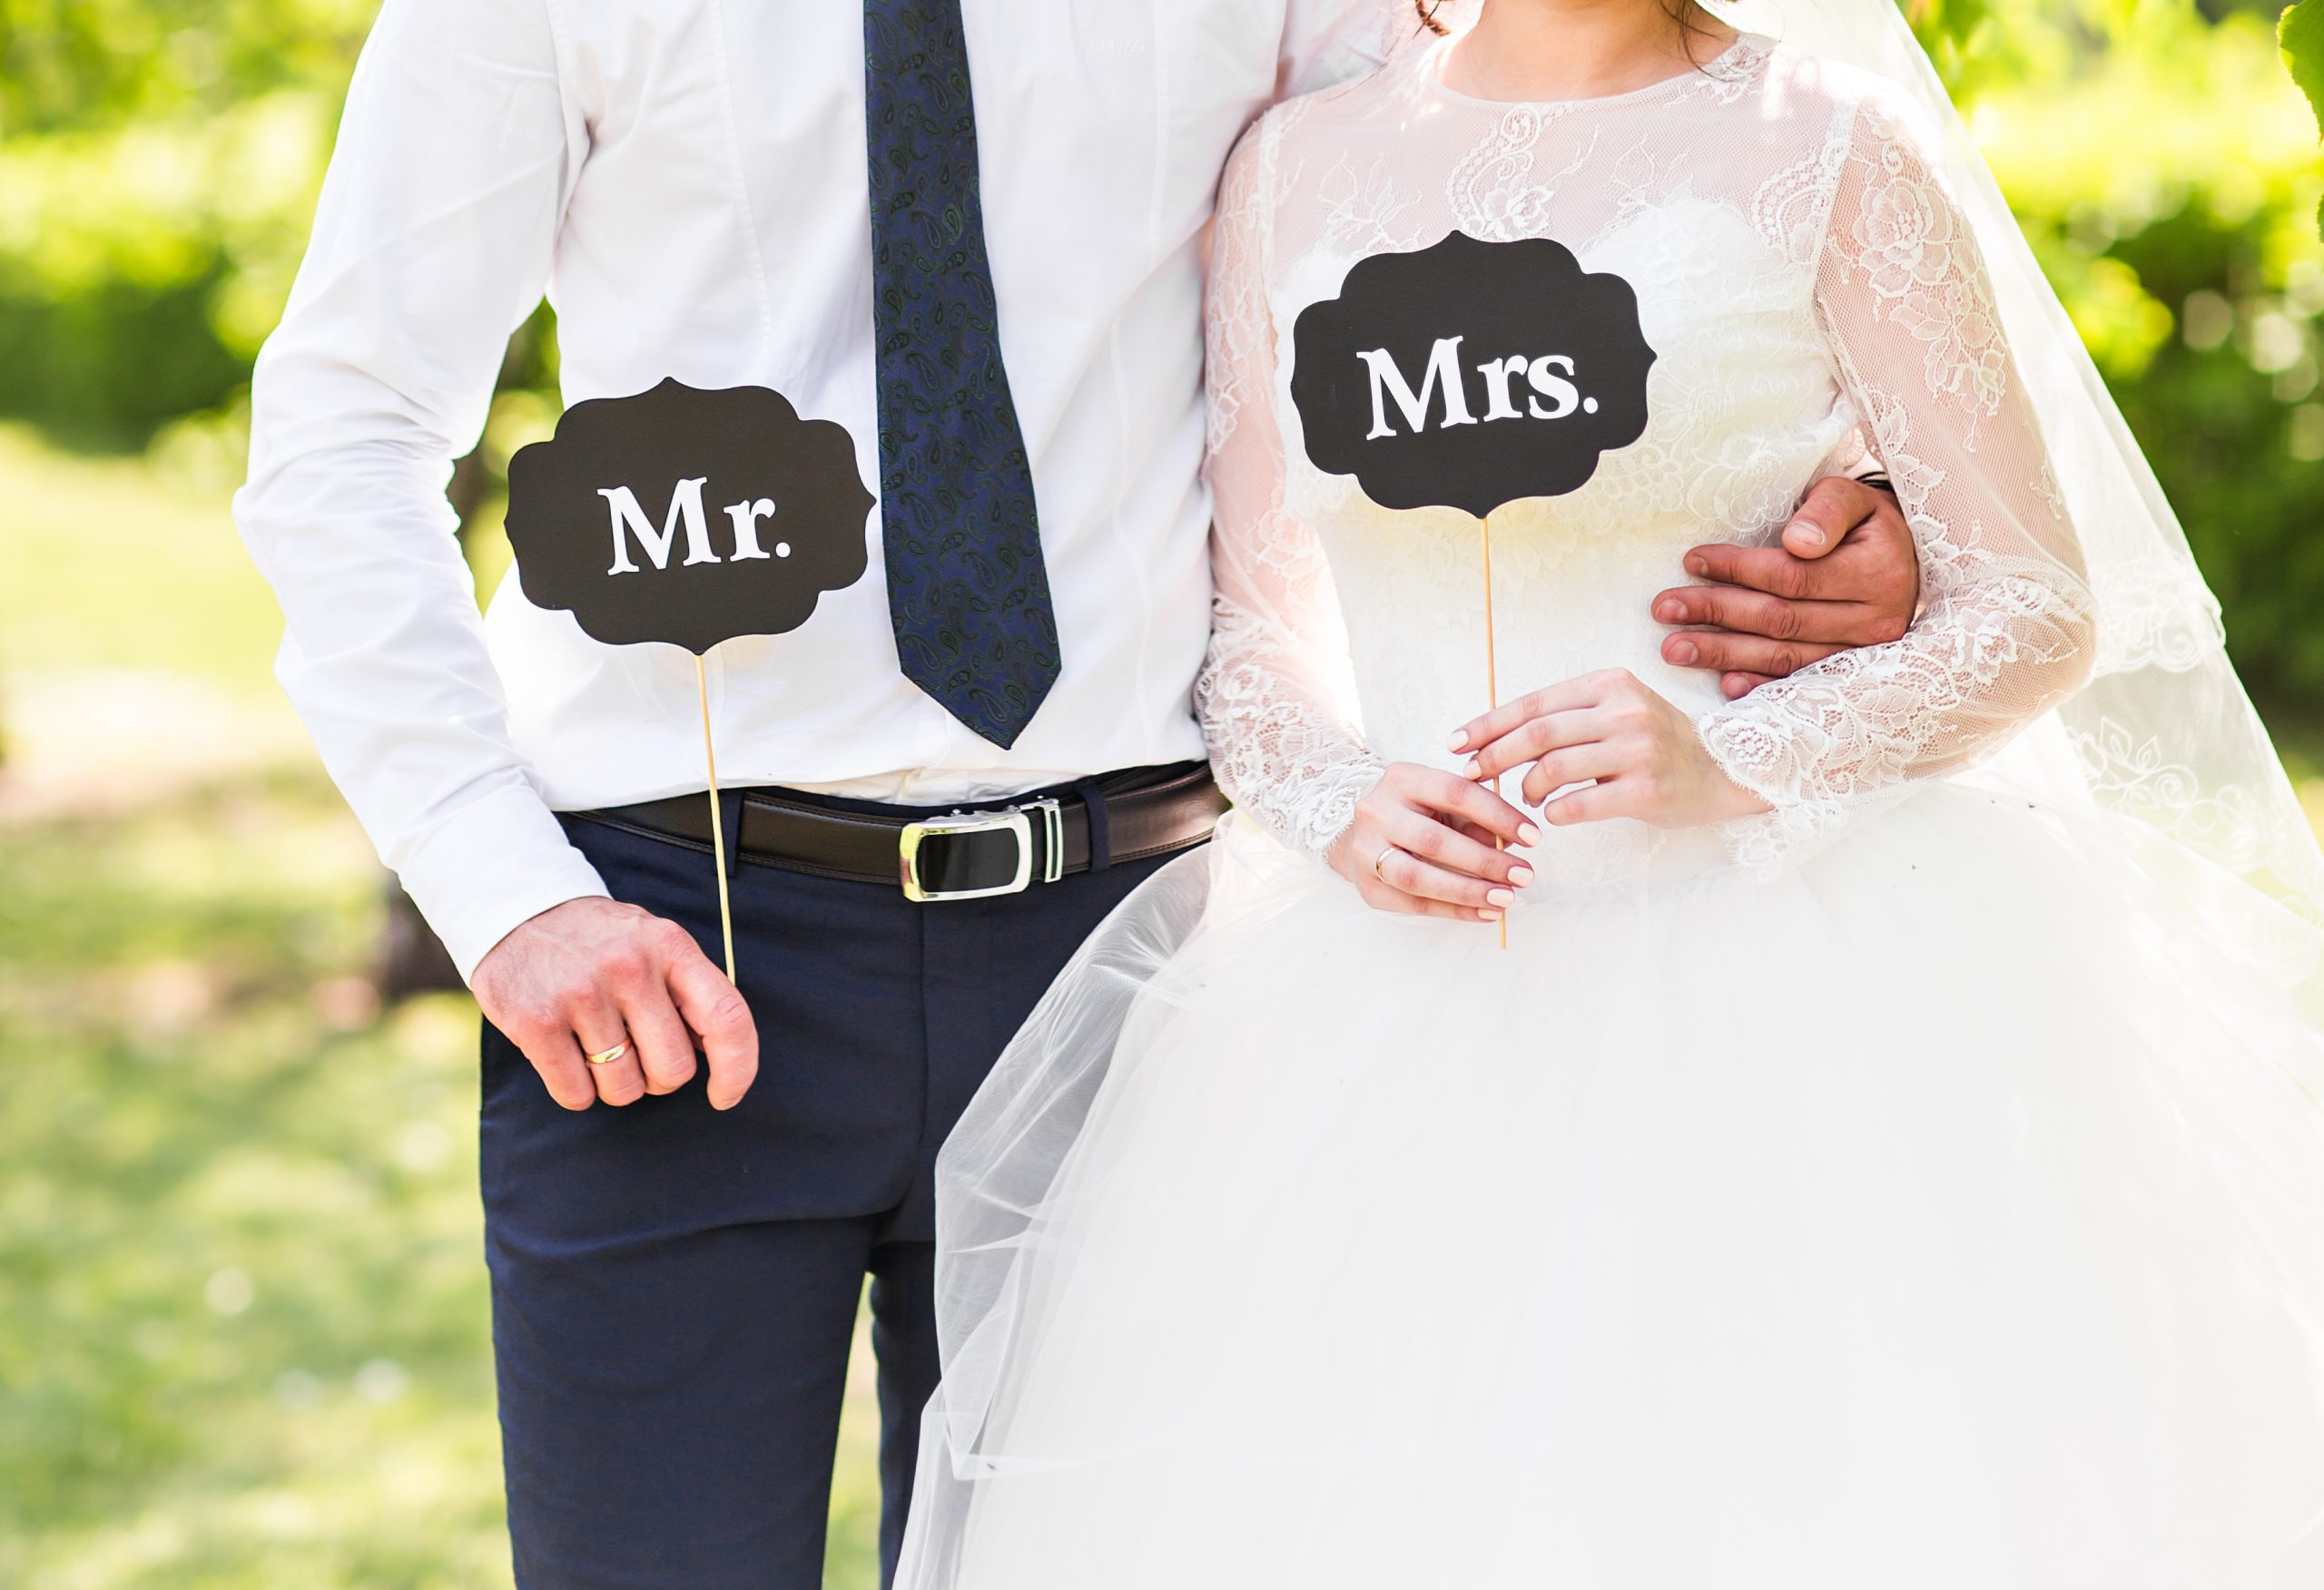 100 Questions For The Ultimate Mr & Mrs Wedding Quiz - Wedding Journal